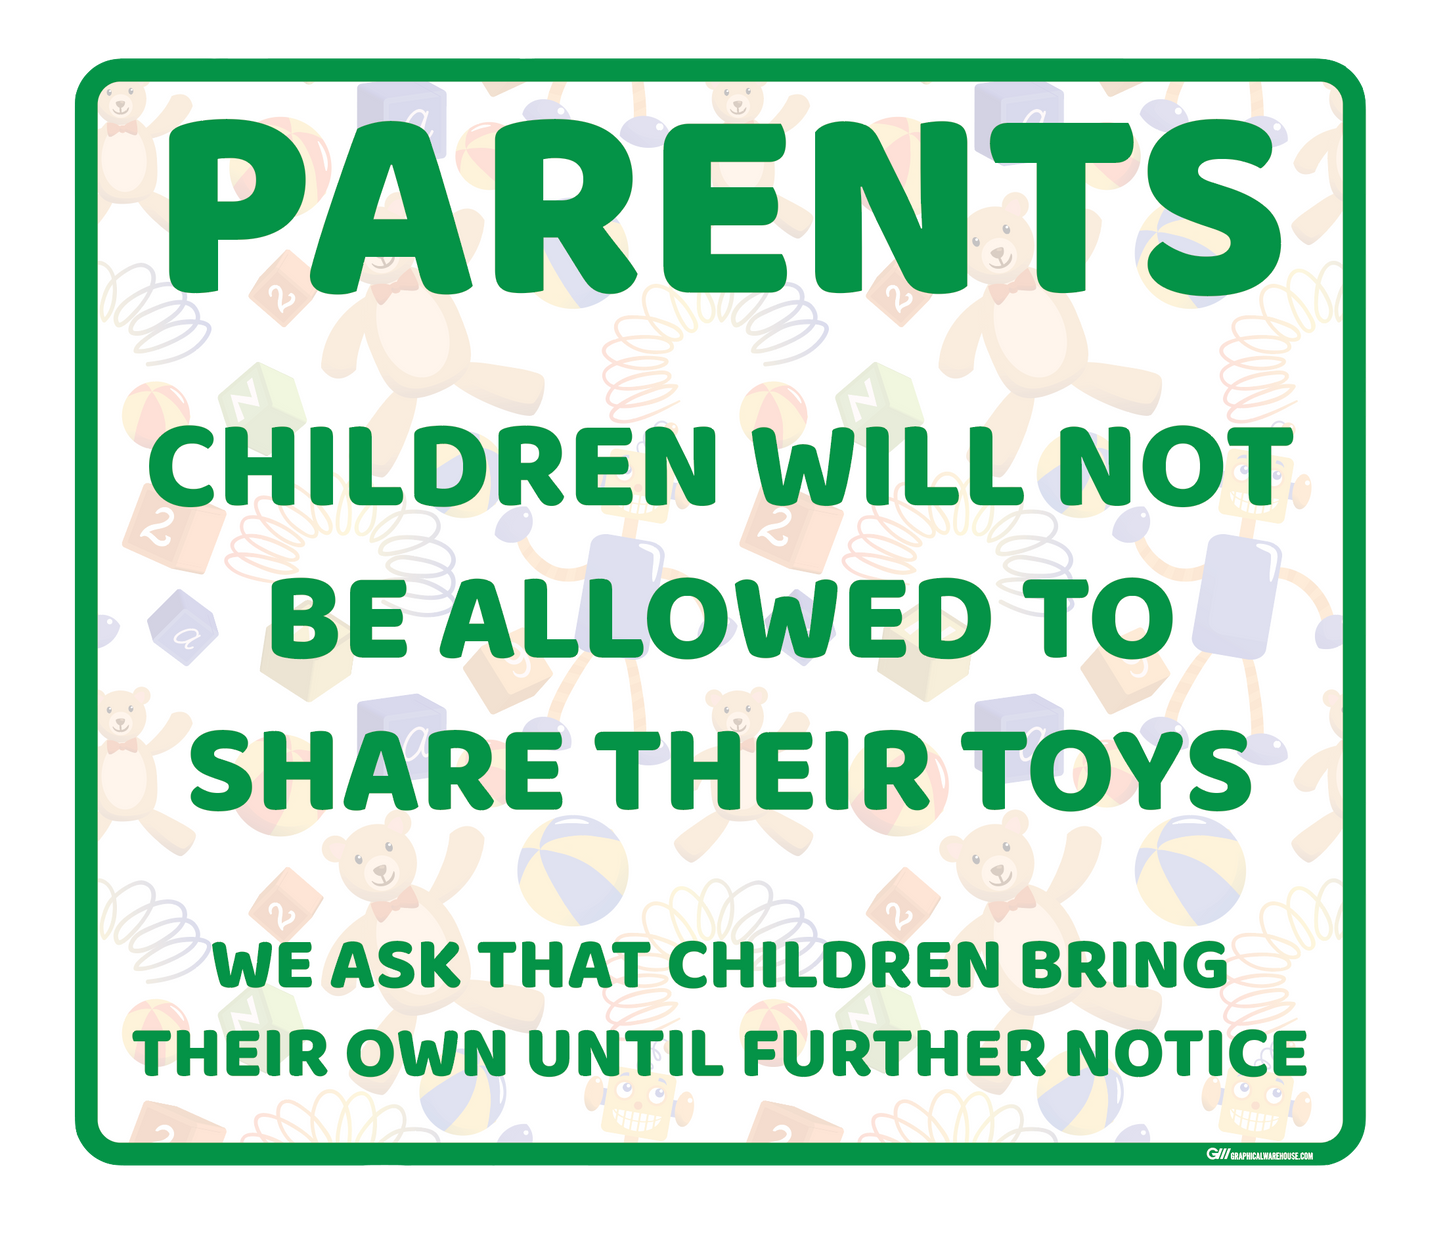 "Daycare, Not Sharing Toys" Adhesive Durable Vinyl Decal- Various Sizes/Colors Available